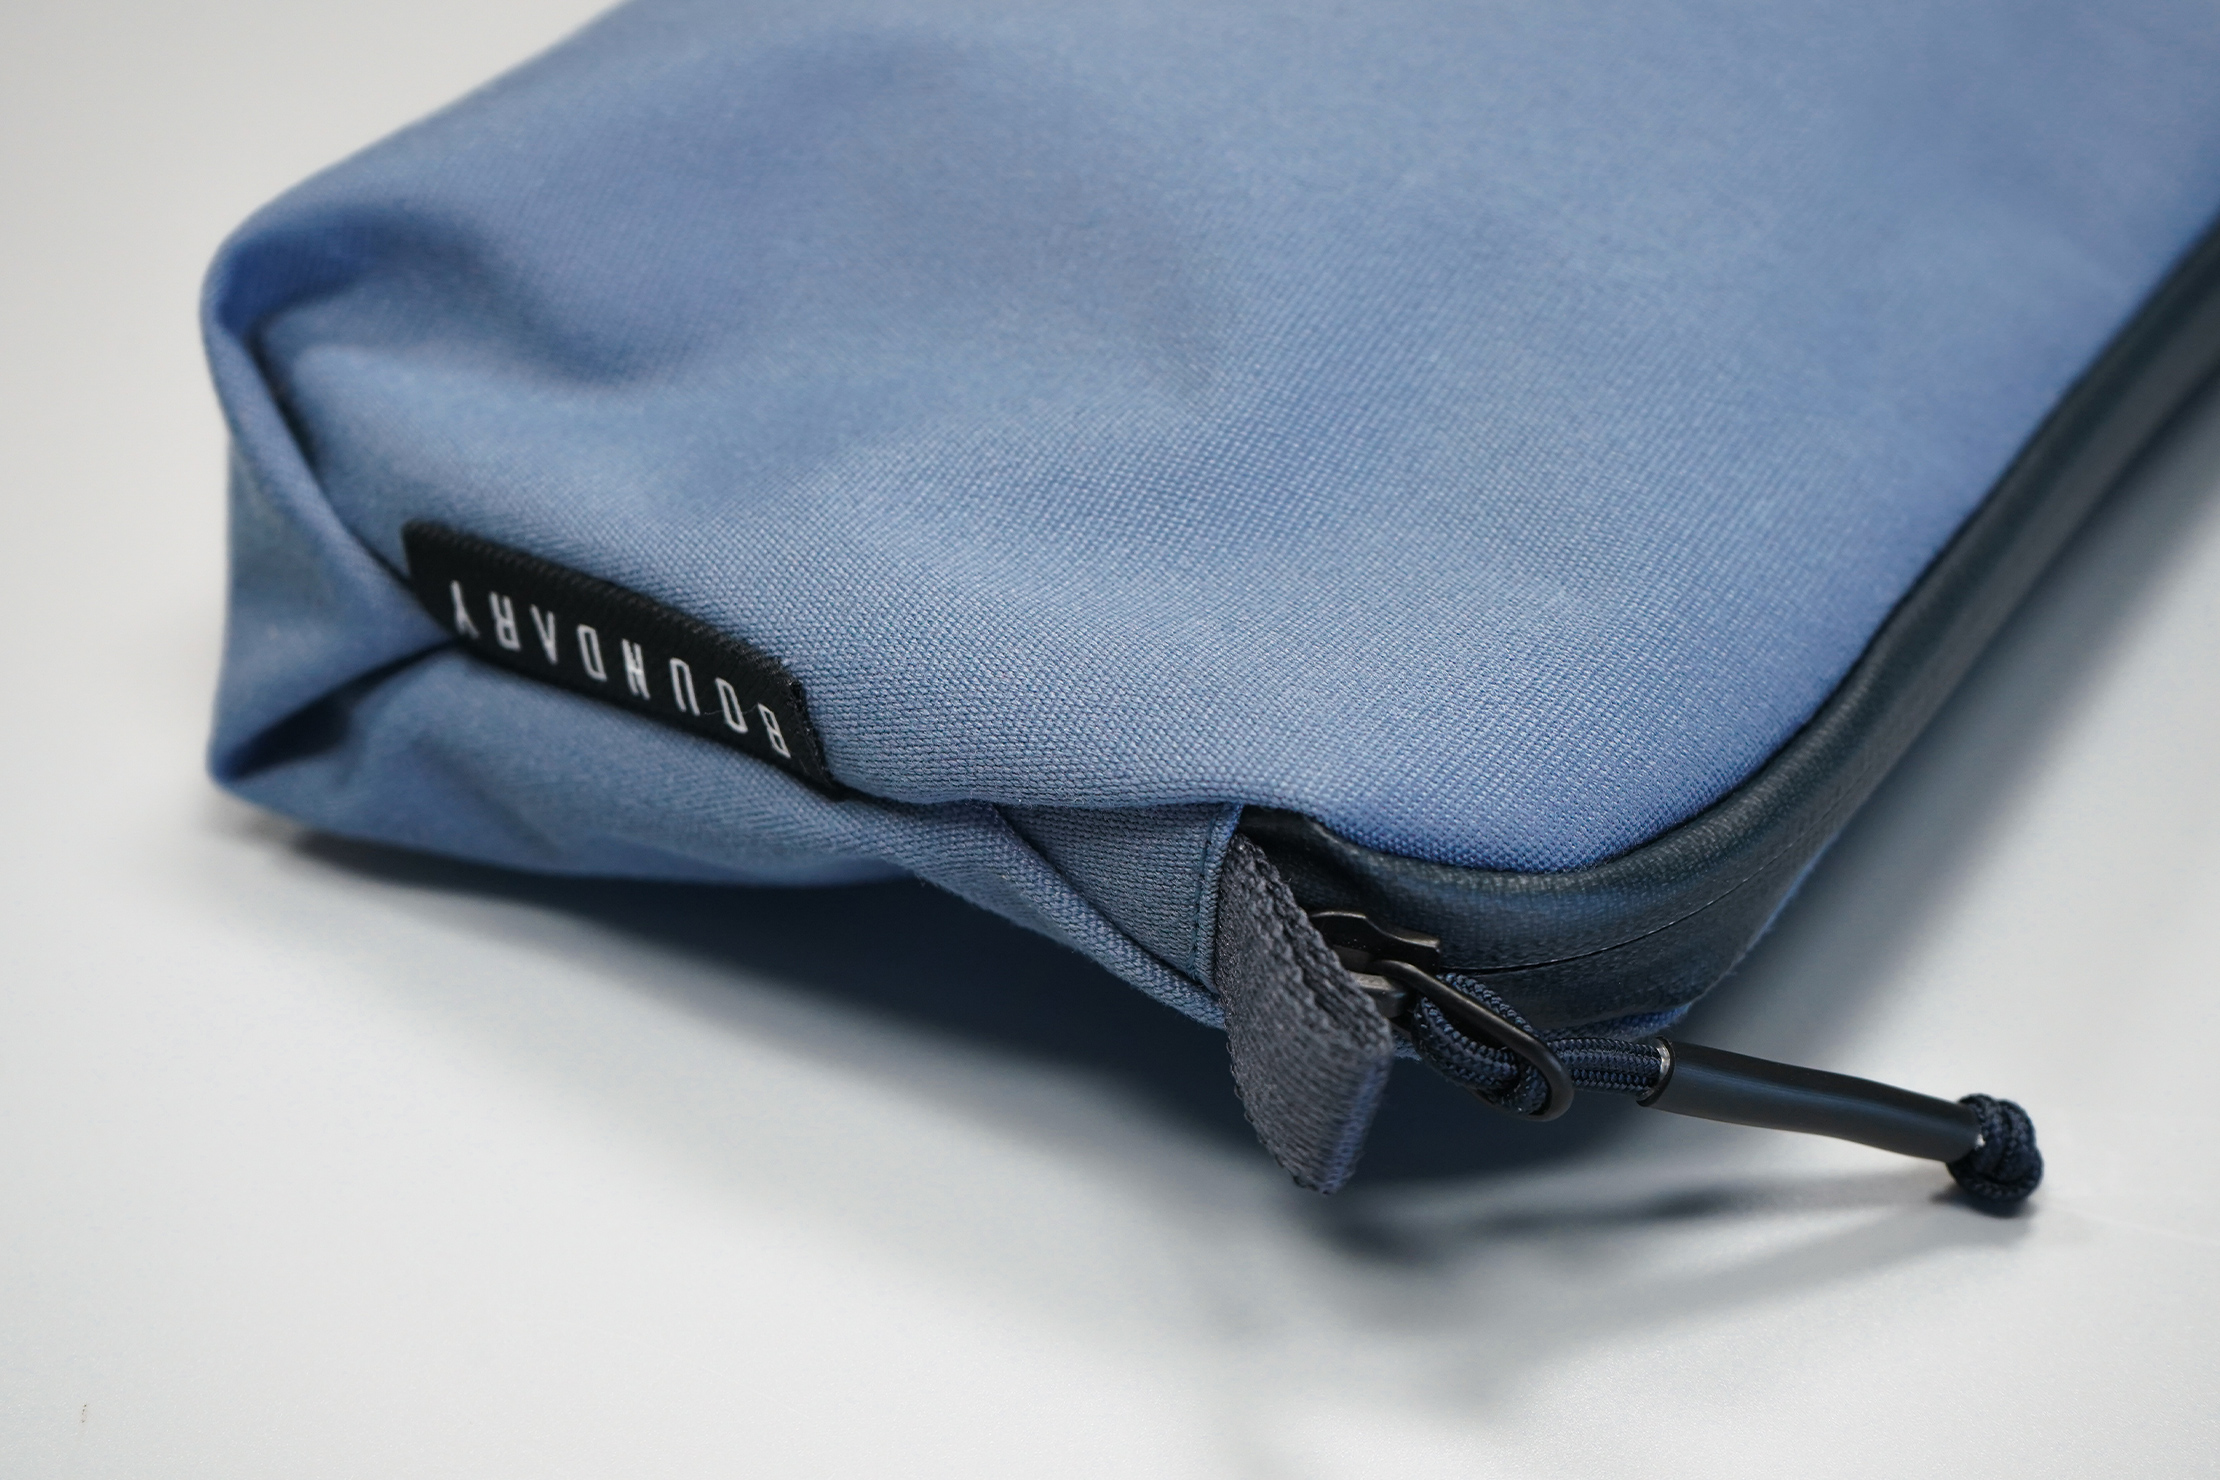 Boundary Supply Rennen Recycled Pouch | Material, branding, and zipper